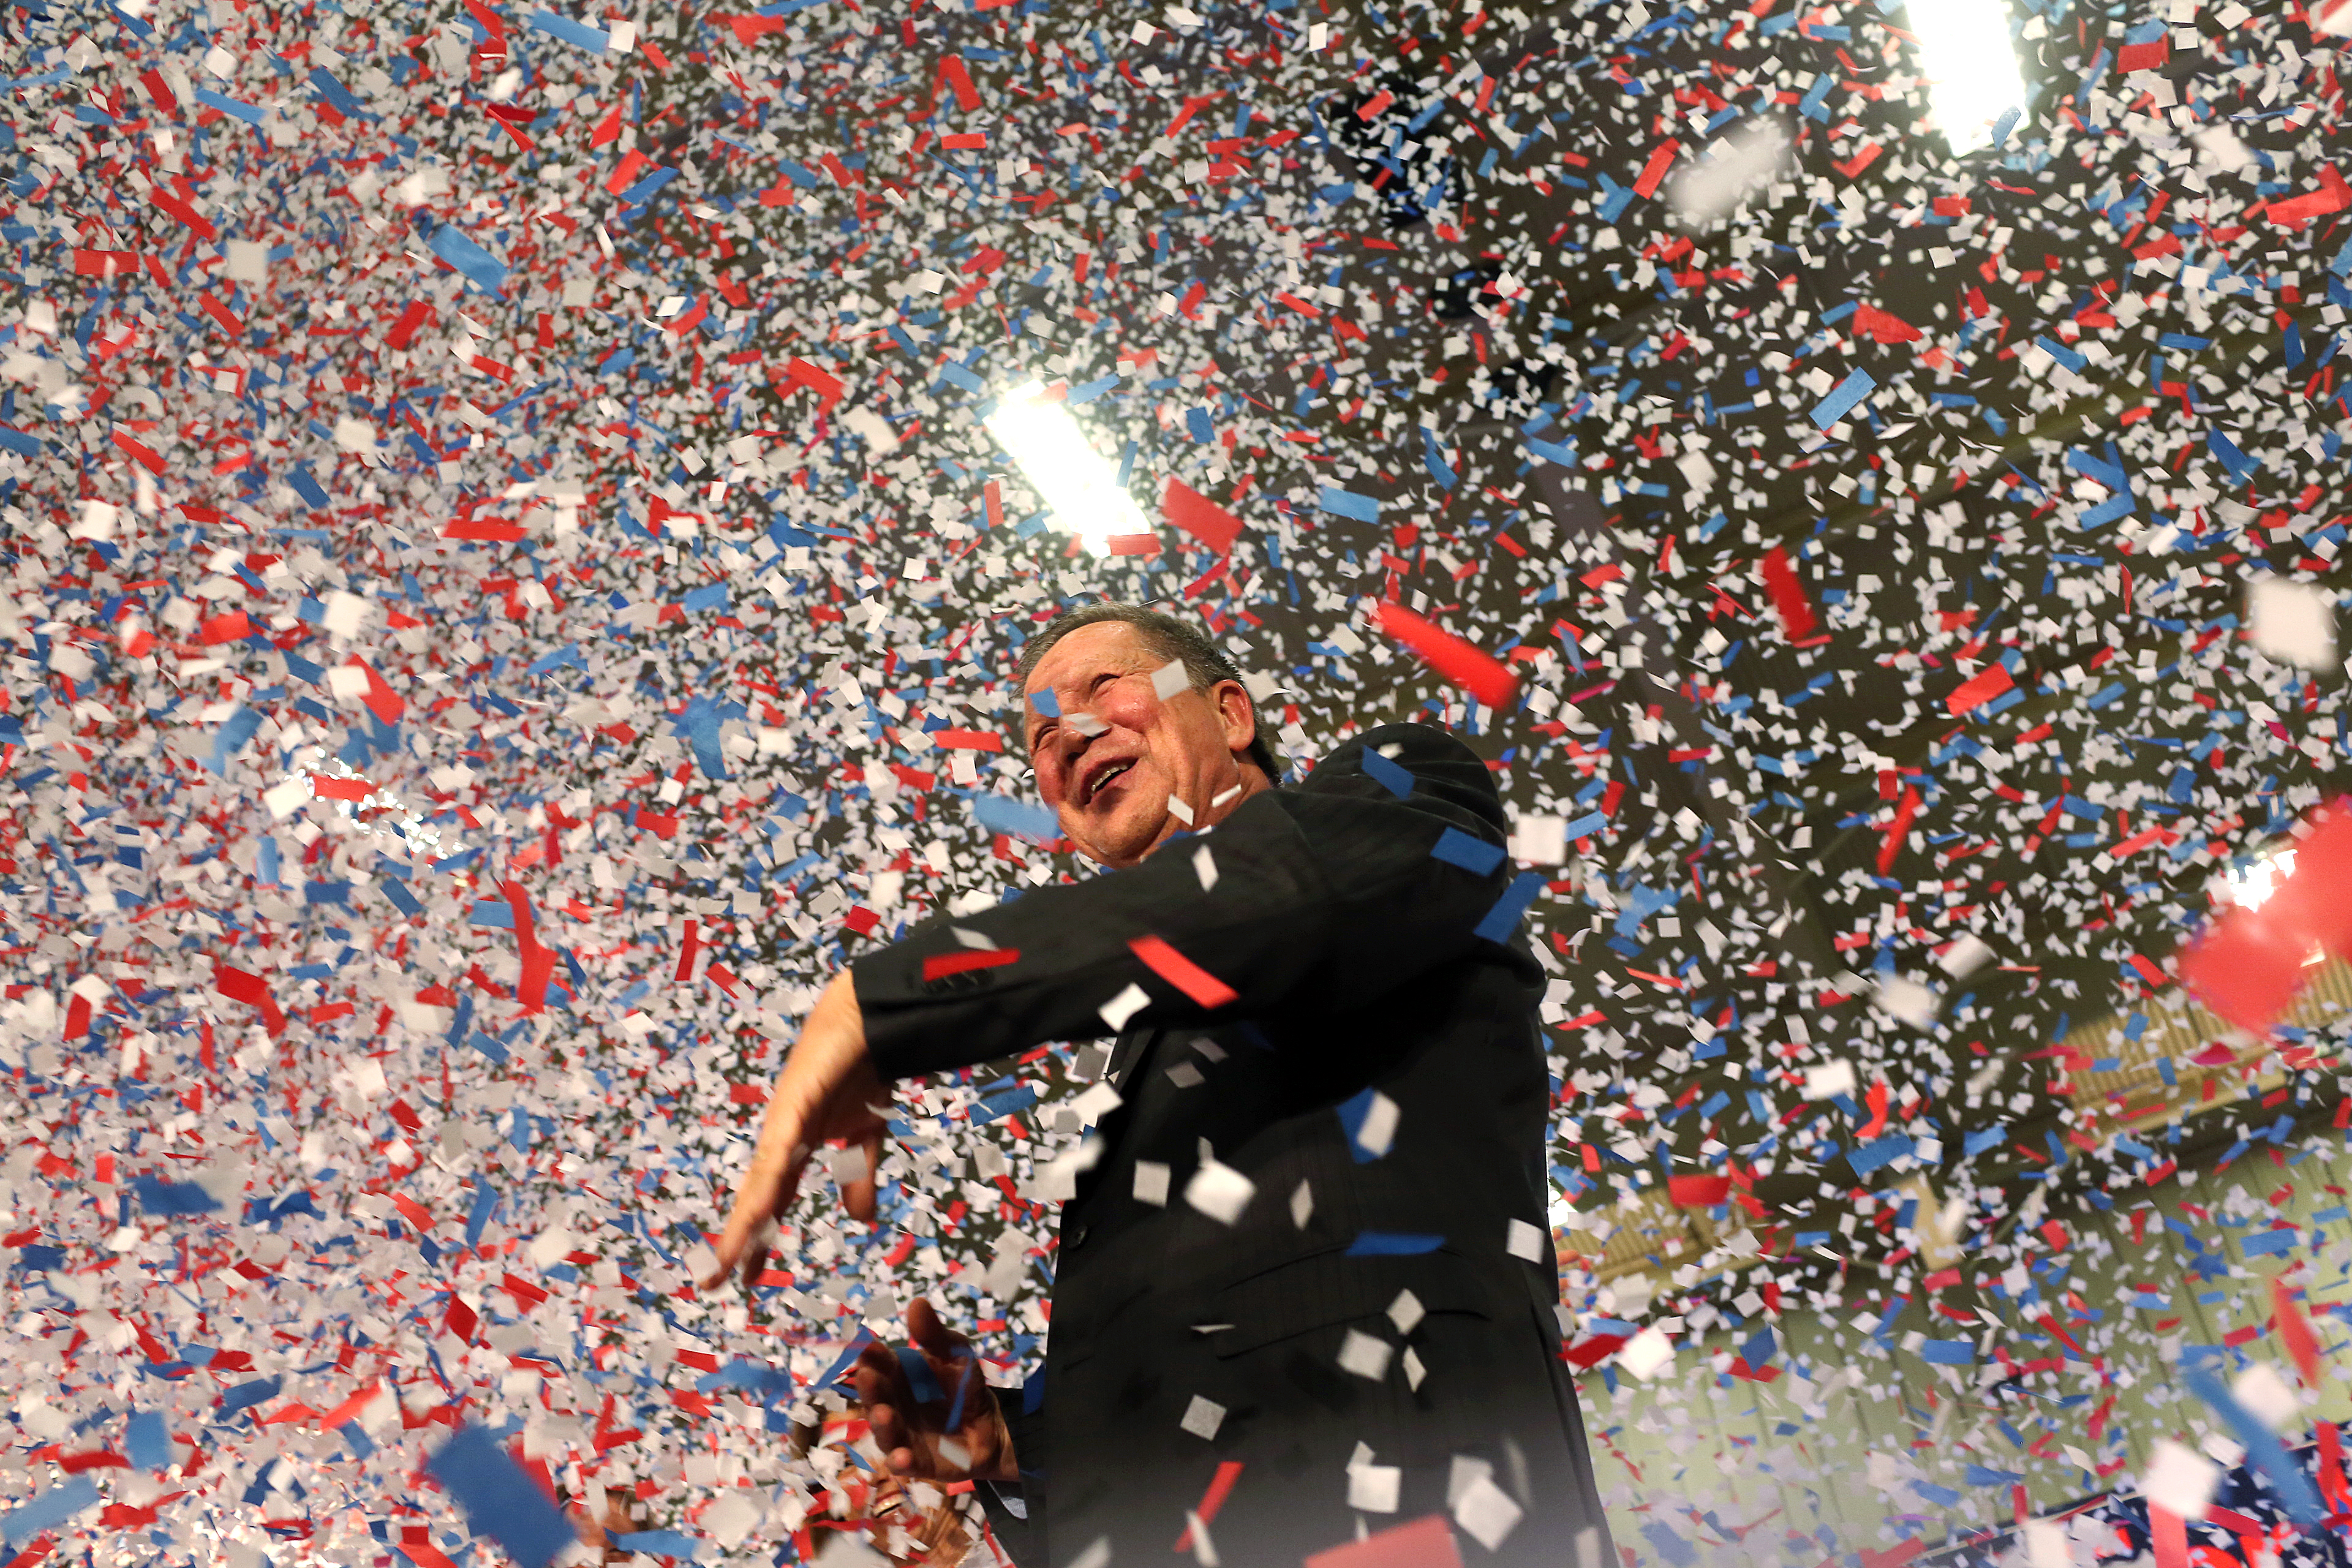 Republican presidential candidate, Ohio Gov. John Kasich waves confetti out of his way after giving his victory speech at Baldwin-Wallace University in Berea, Ohio on March 15, 2016.